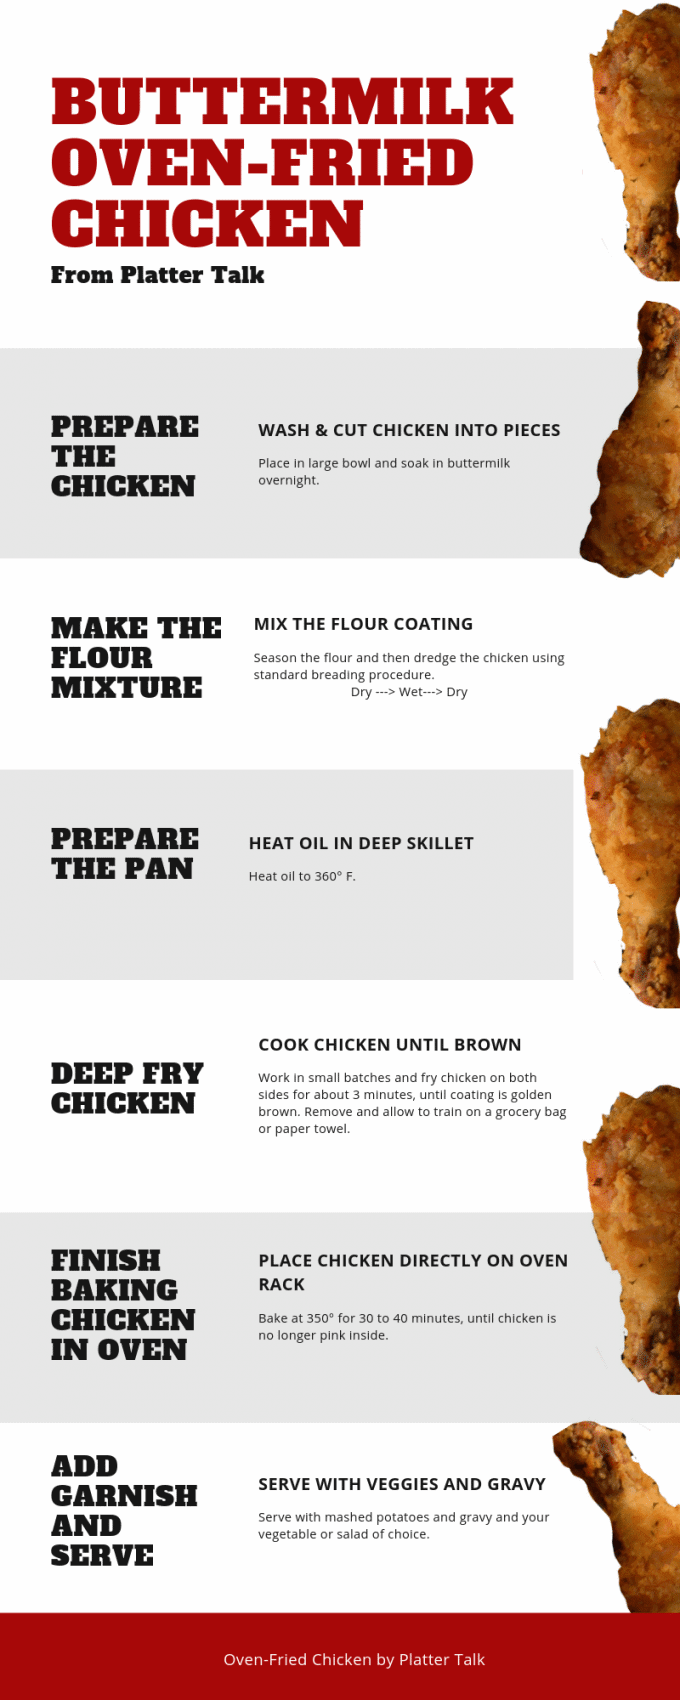 Steps to make oven-fried chicken